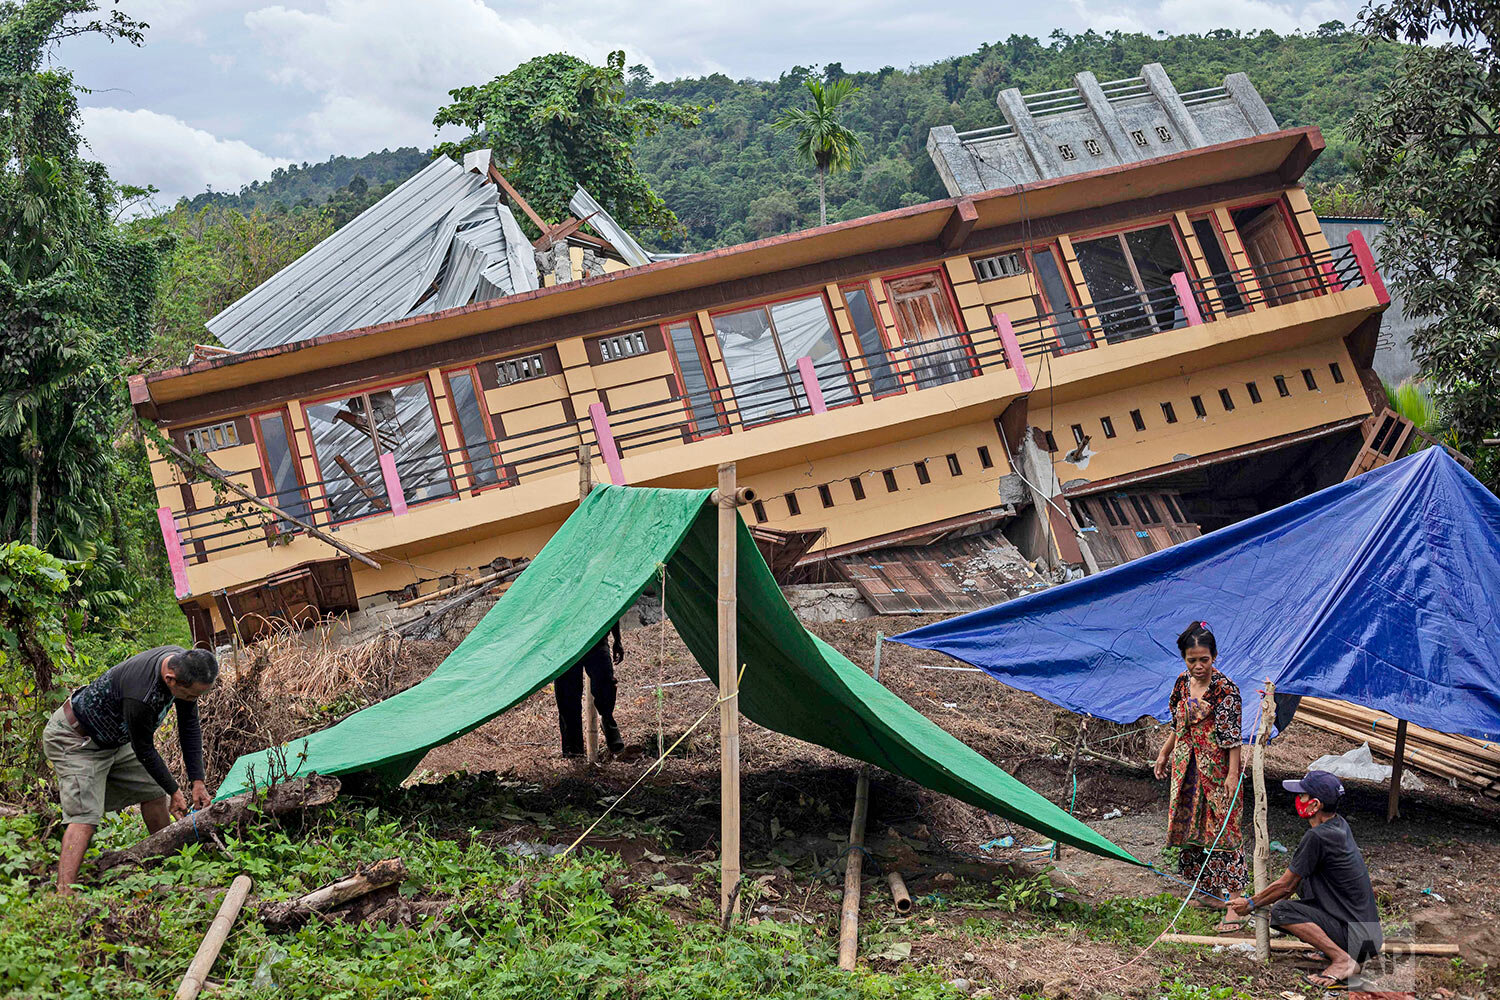  Residents build tents outside their house badly damaged by earthquake in Mamuju, West Sulawesi, Indonesia, Tuesday, Jan. 19, 2021.  (AP Photo/Yusuf Wahil) 